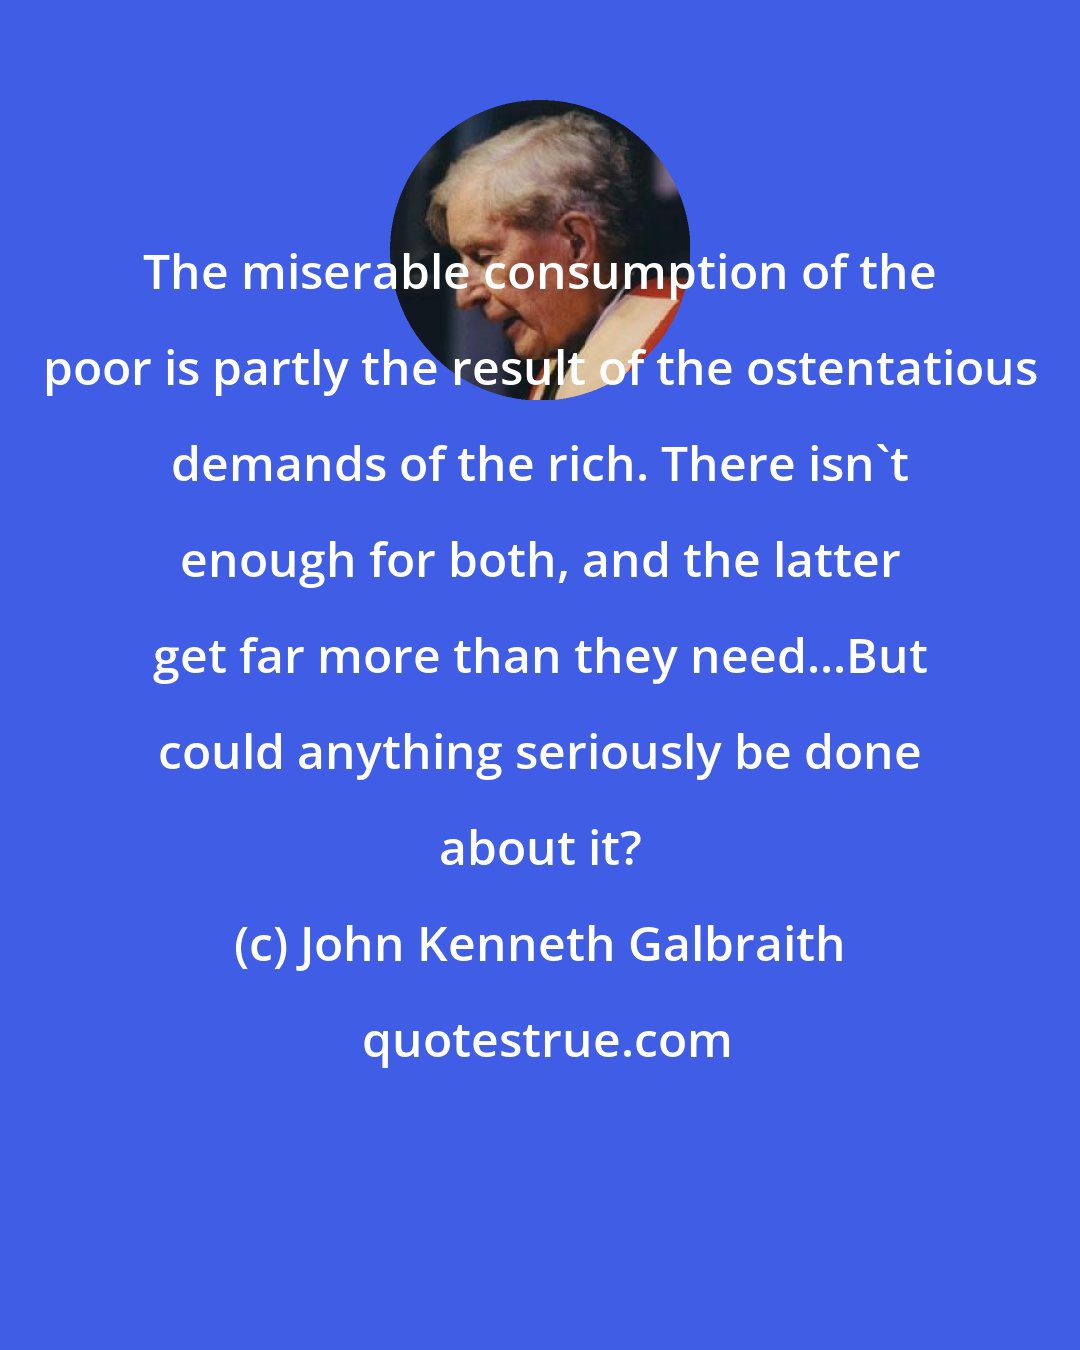 John Kenneth Galbraith: The miserable consumption of the poor is partly the result of the ostentatious demands of the rich. There isn't enough for both, and the latter get far more than they need...But could anything seriously be done about it?